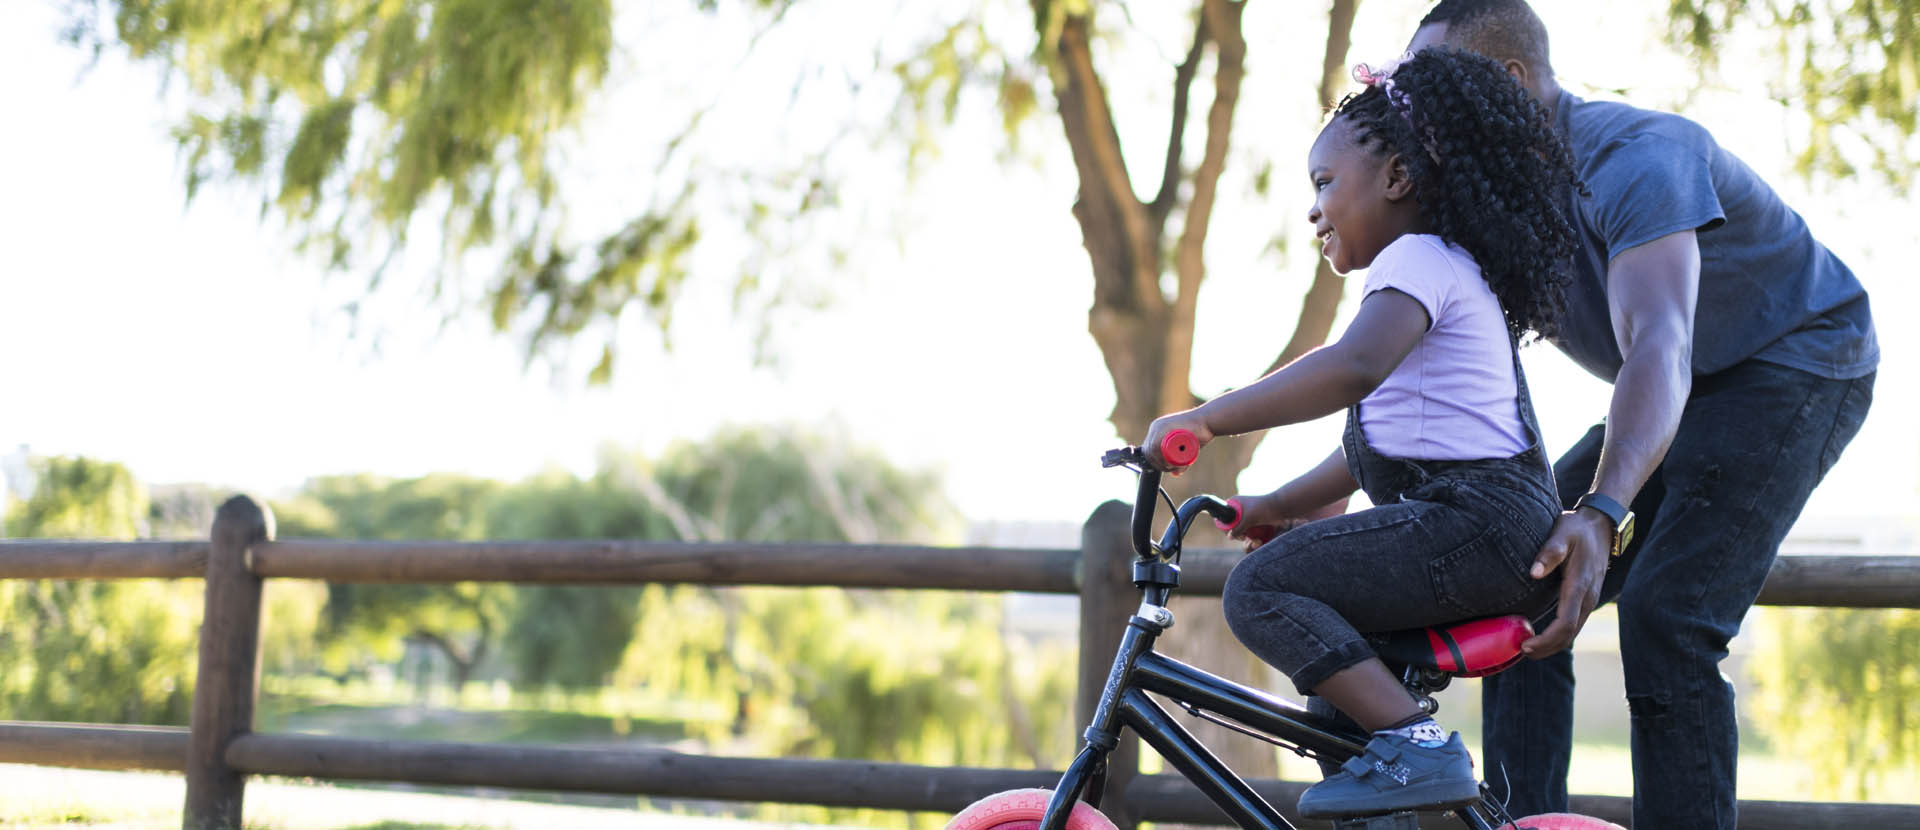 Tips for Helping Your Child Learn to Ride a Bike, Whatever Their Age